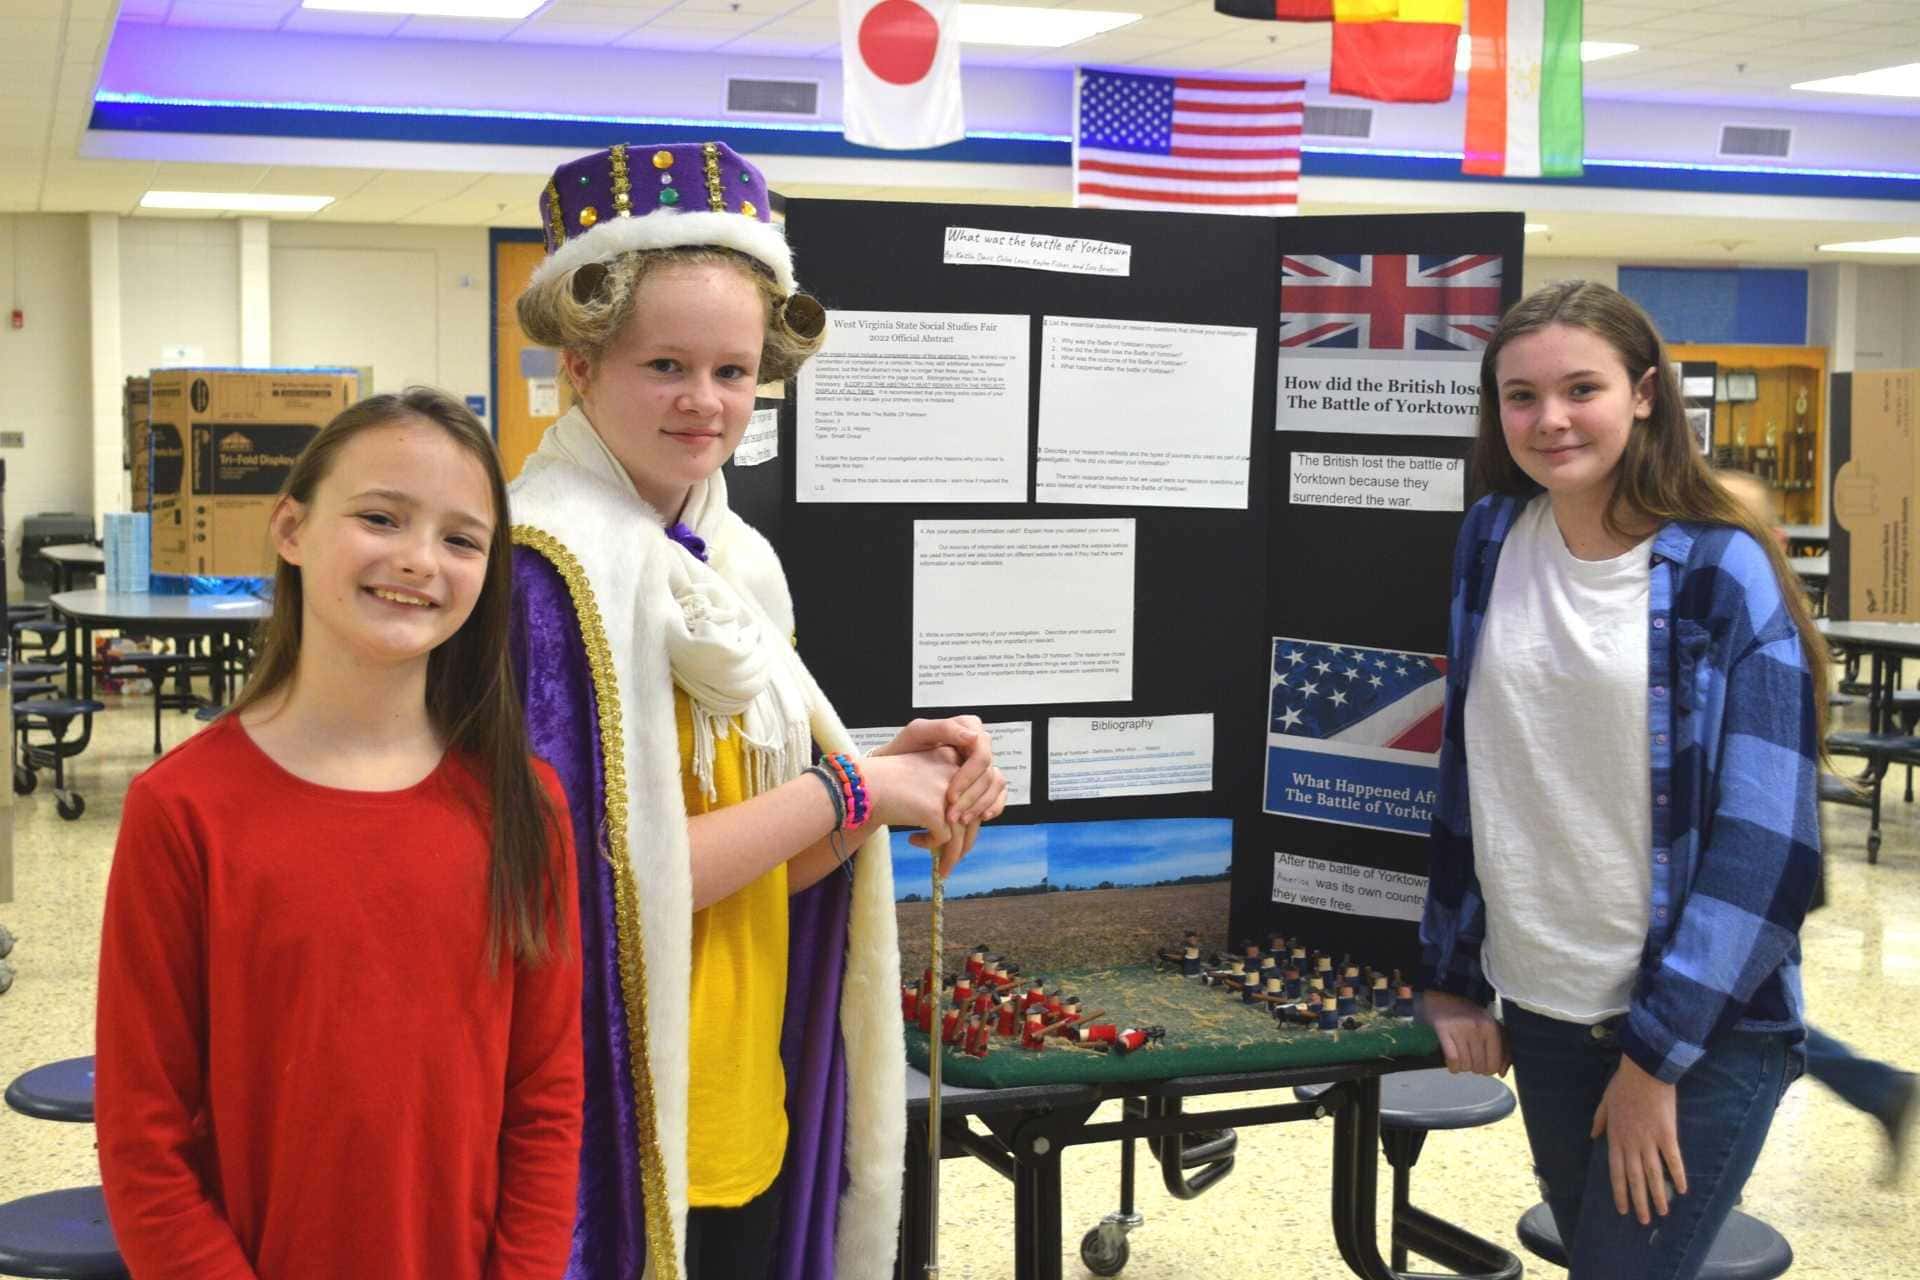 The Battle of Yorktown was one of the projects featured at Saturday’s Upshur County Social Studies Fair. Buckhannon-Upshur Middle School 6th grade students Kaitlin Davis, Isabella Bowers and Kaylee Fisher said they were inspired by the movie ‘Hamilton.’